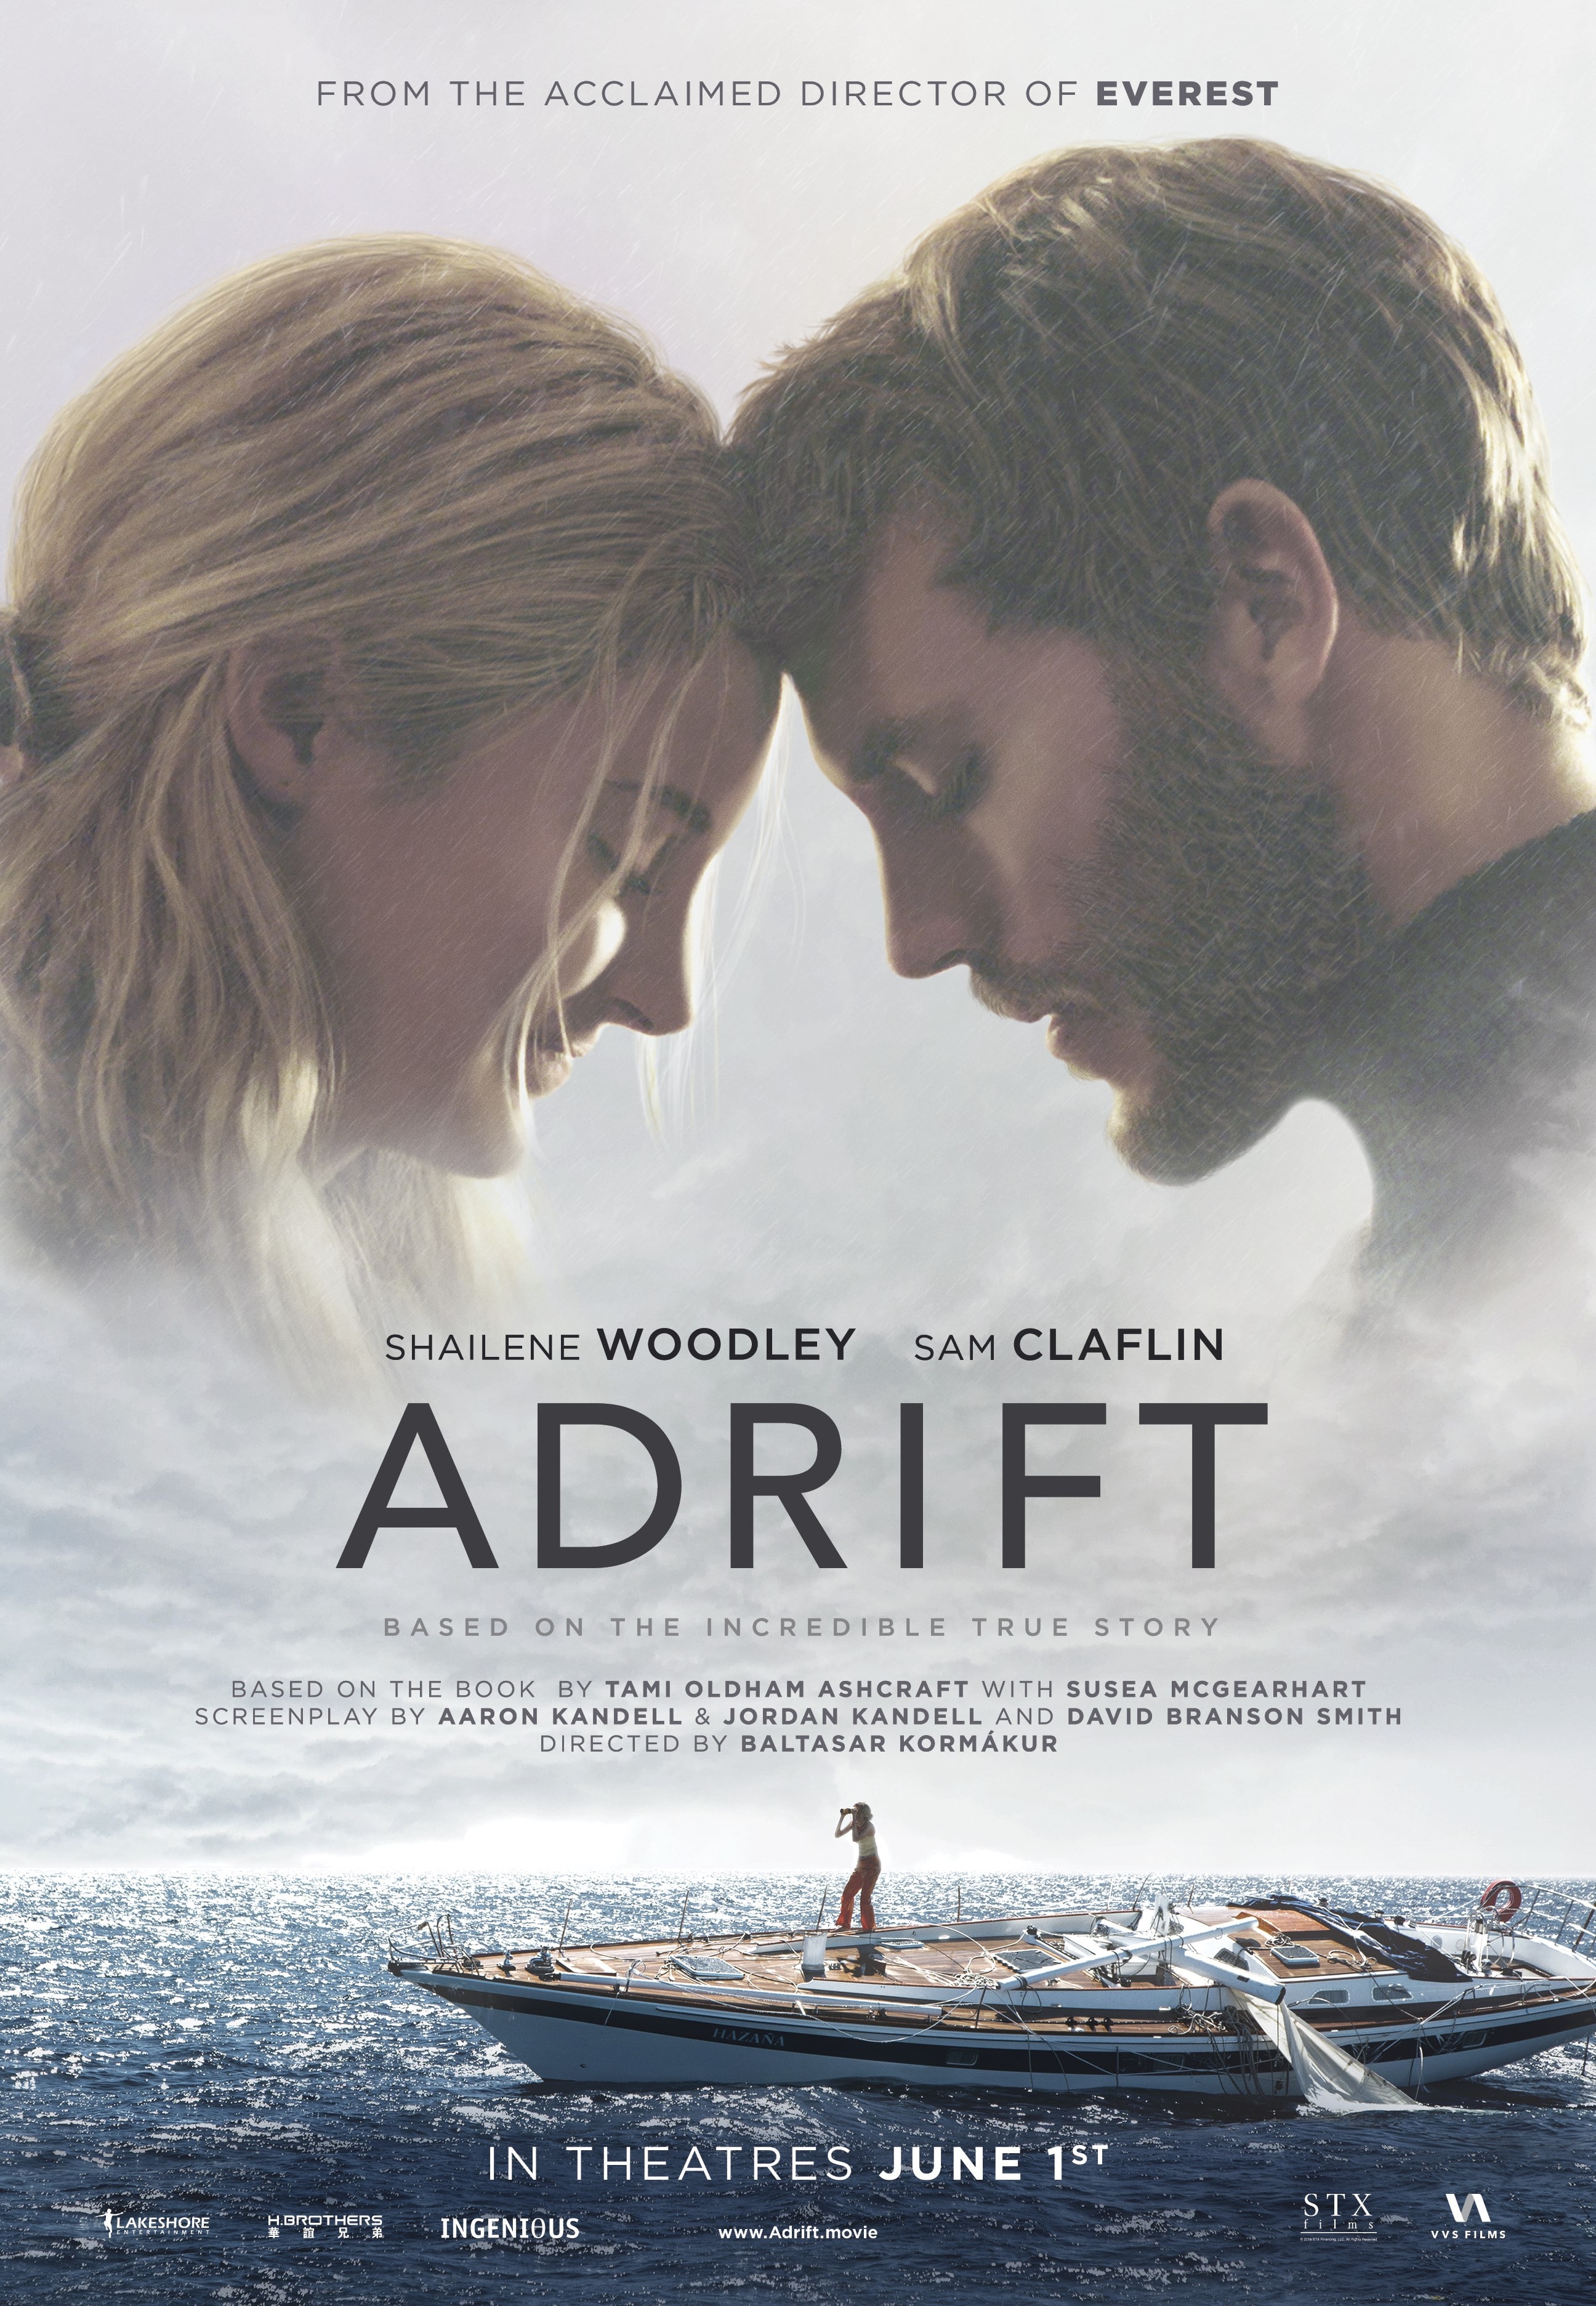 Win Passes to see an Advance Screening of Adrift